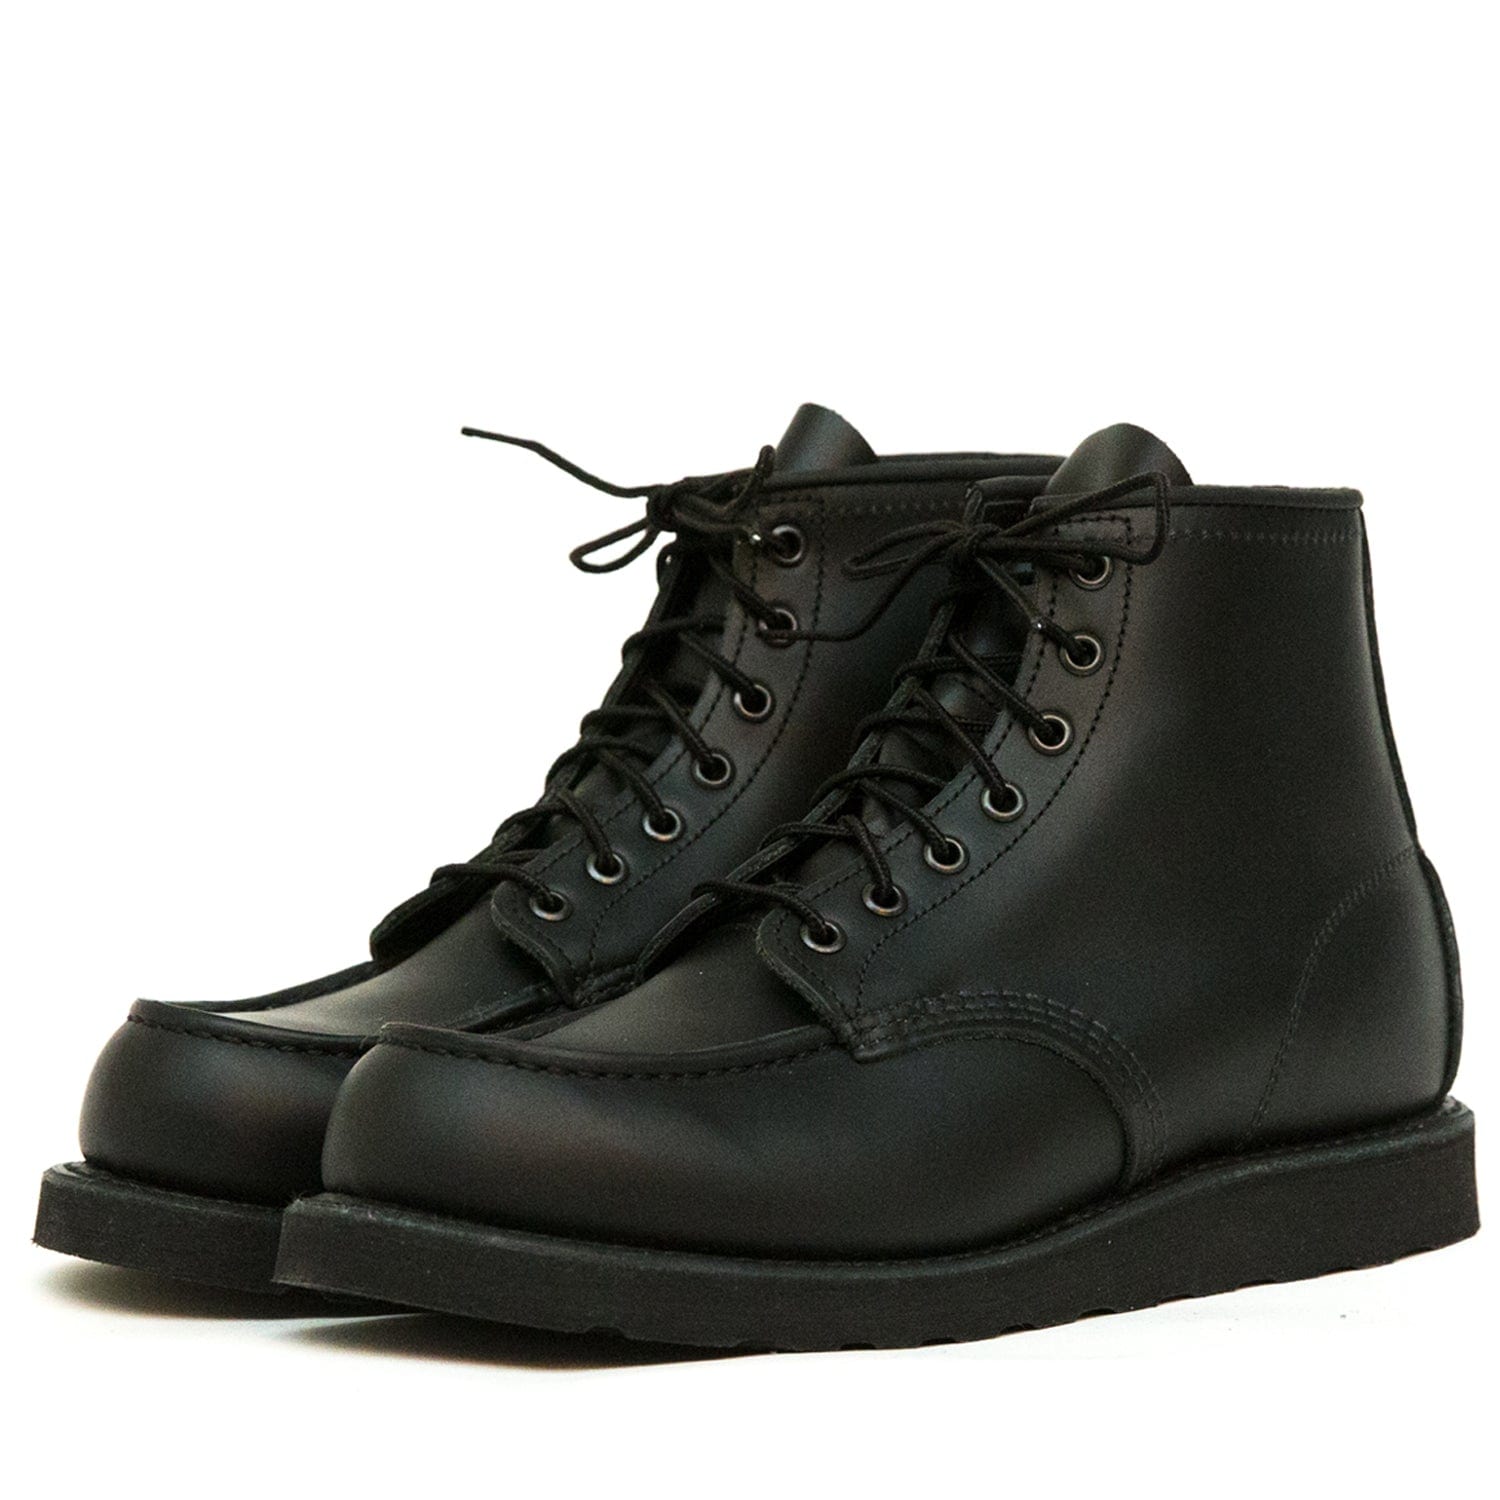 red wing black moc toe boots